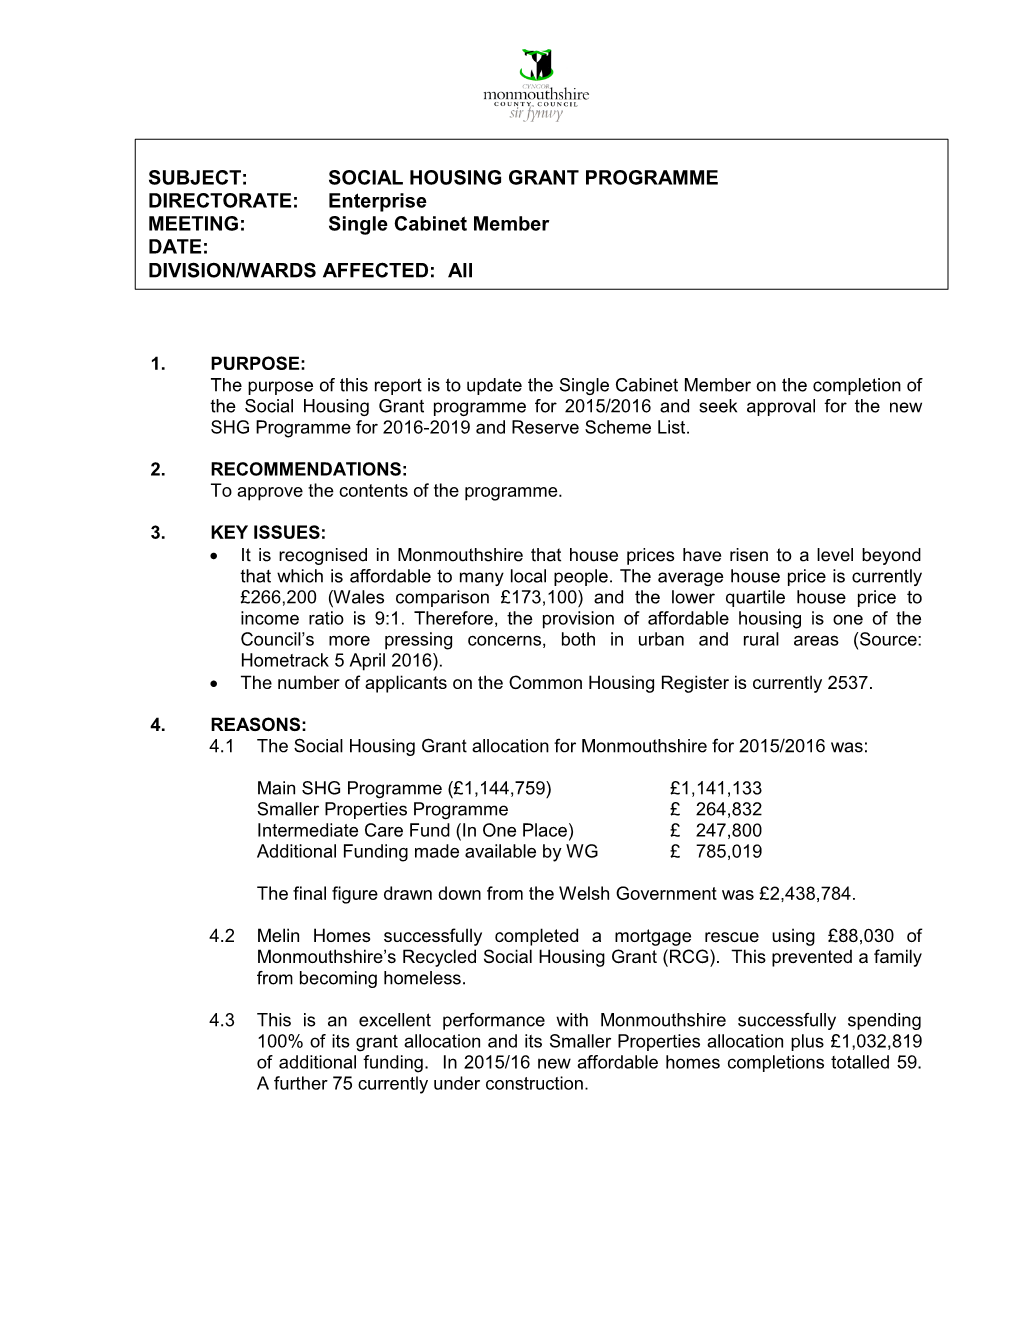 SUBJECT: SOCIAL HOUSING GRANT PROGRAMME DIRECTORATE: Enterprise MEETING: Single Cabinet Member DATE: DIVISION/WARDS AFFECTED: All